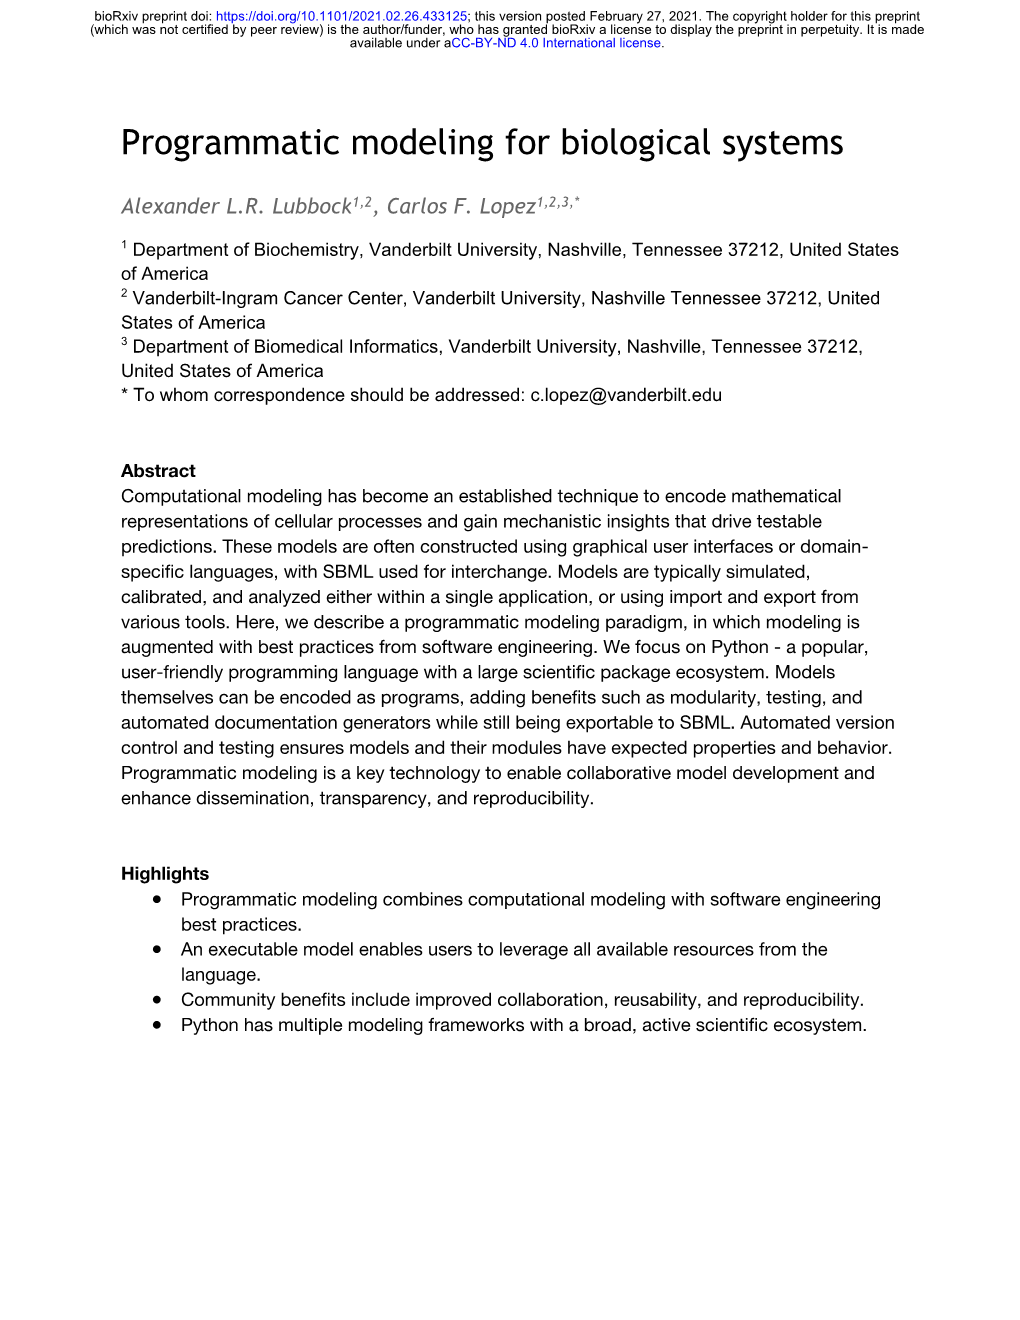 Programmatic Modeling for Biological Systems